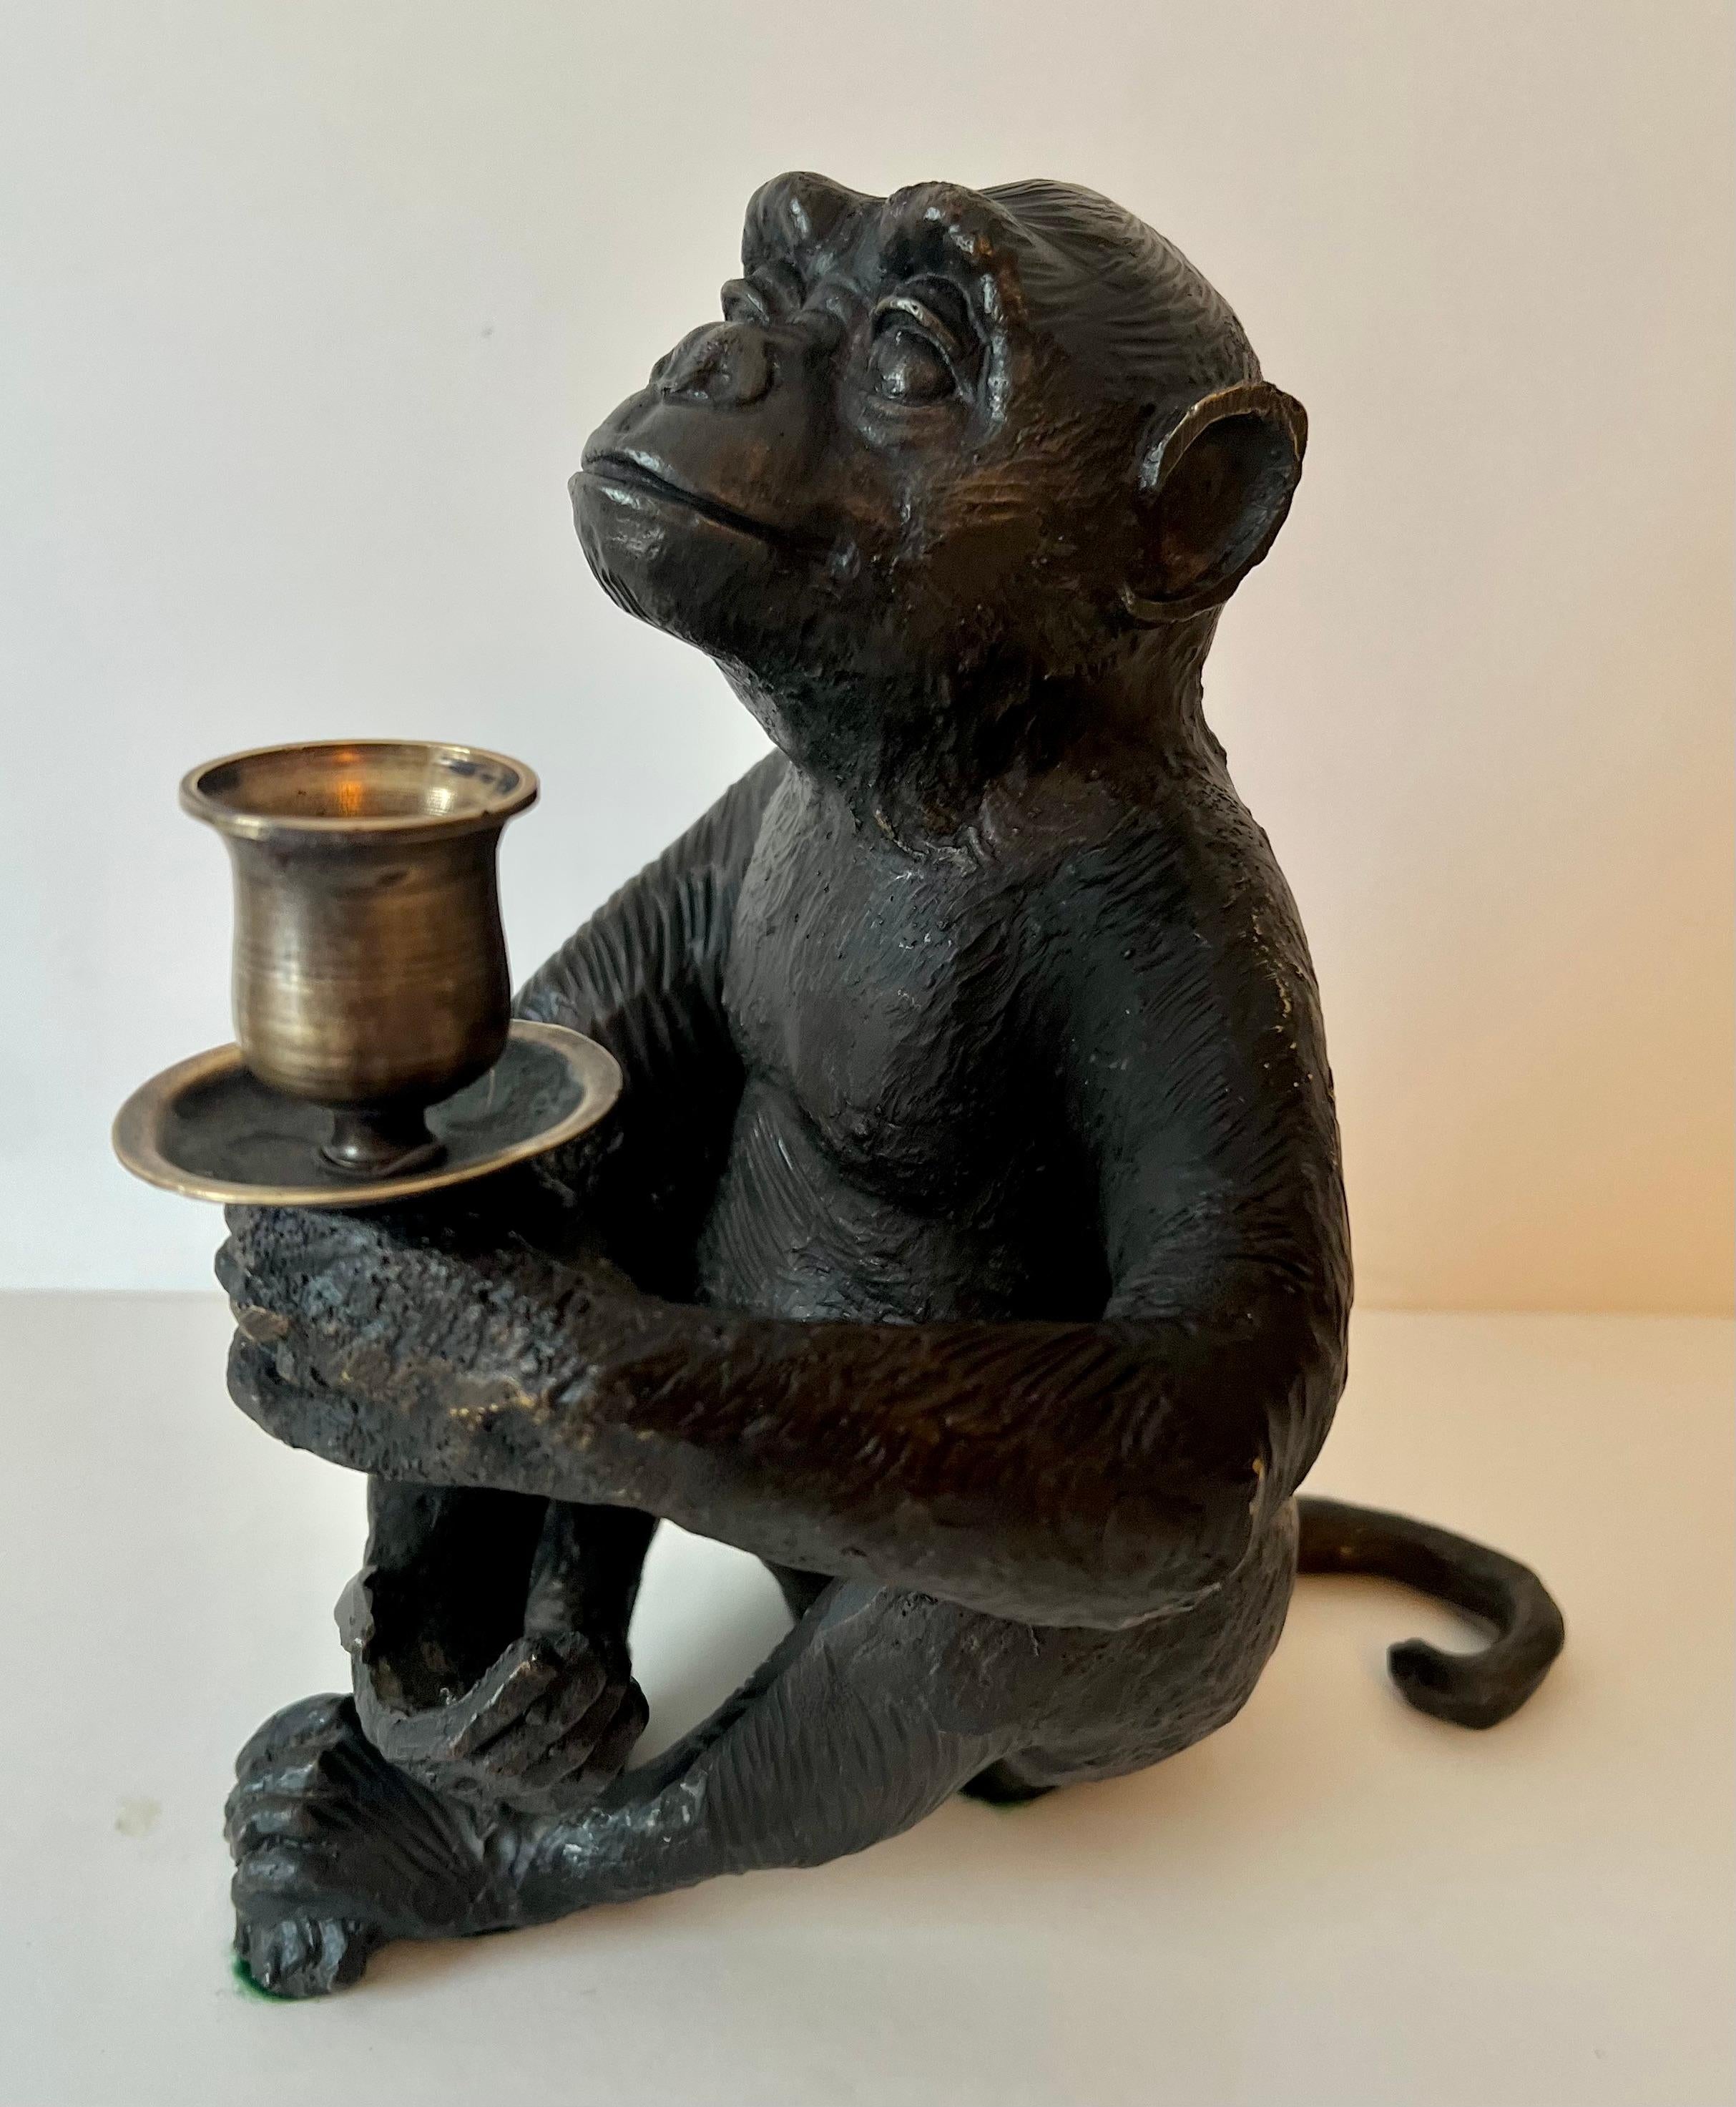 Bronze Monkey Candle Holder. a compliment to many settings or arrangements of candle holders - monkeys are very popular and bring good energy... 
The weight and look are very nice - works in many spaces, from den, to office and Childs room